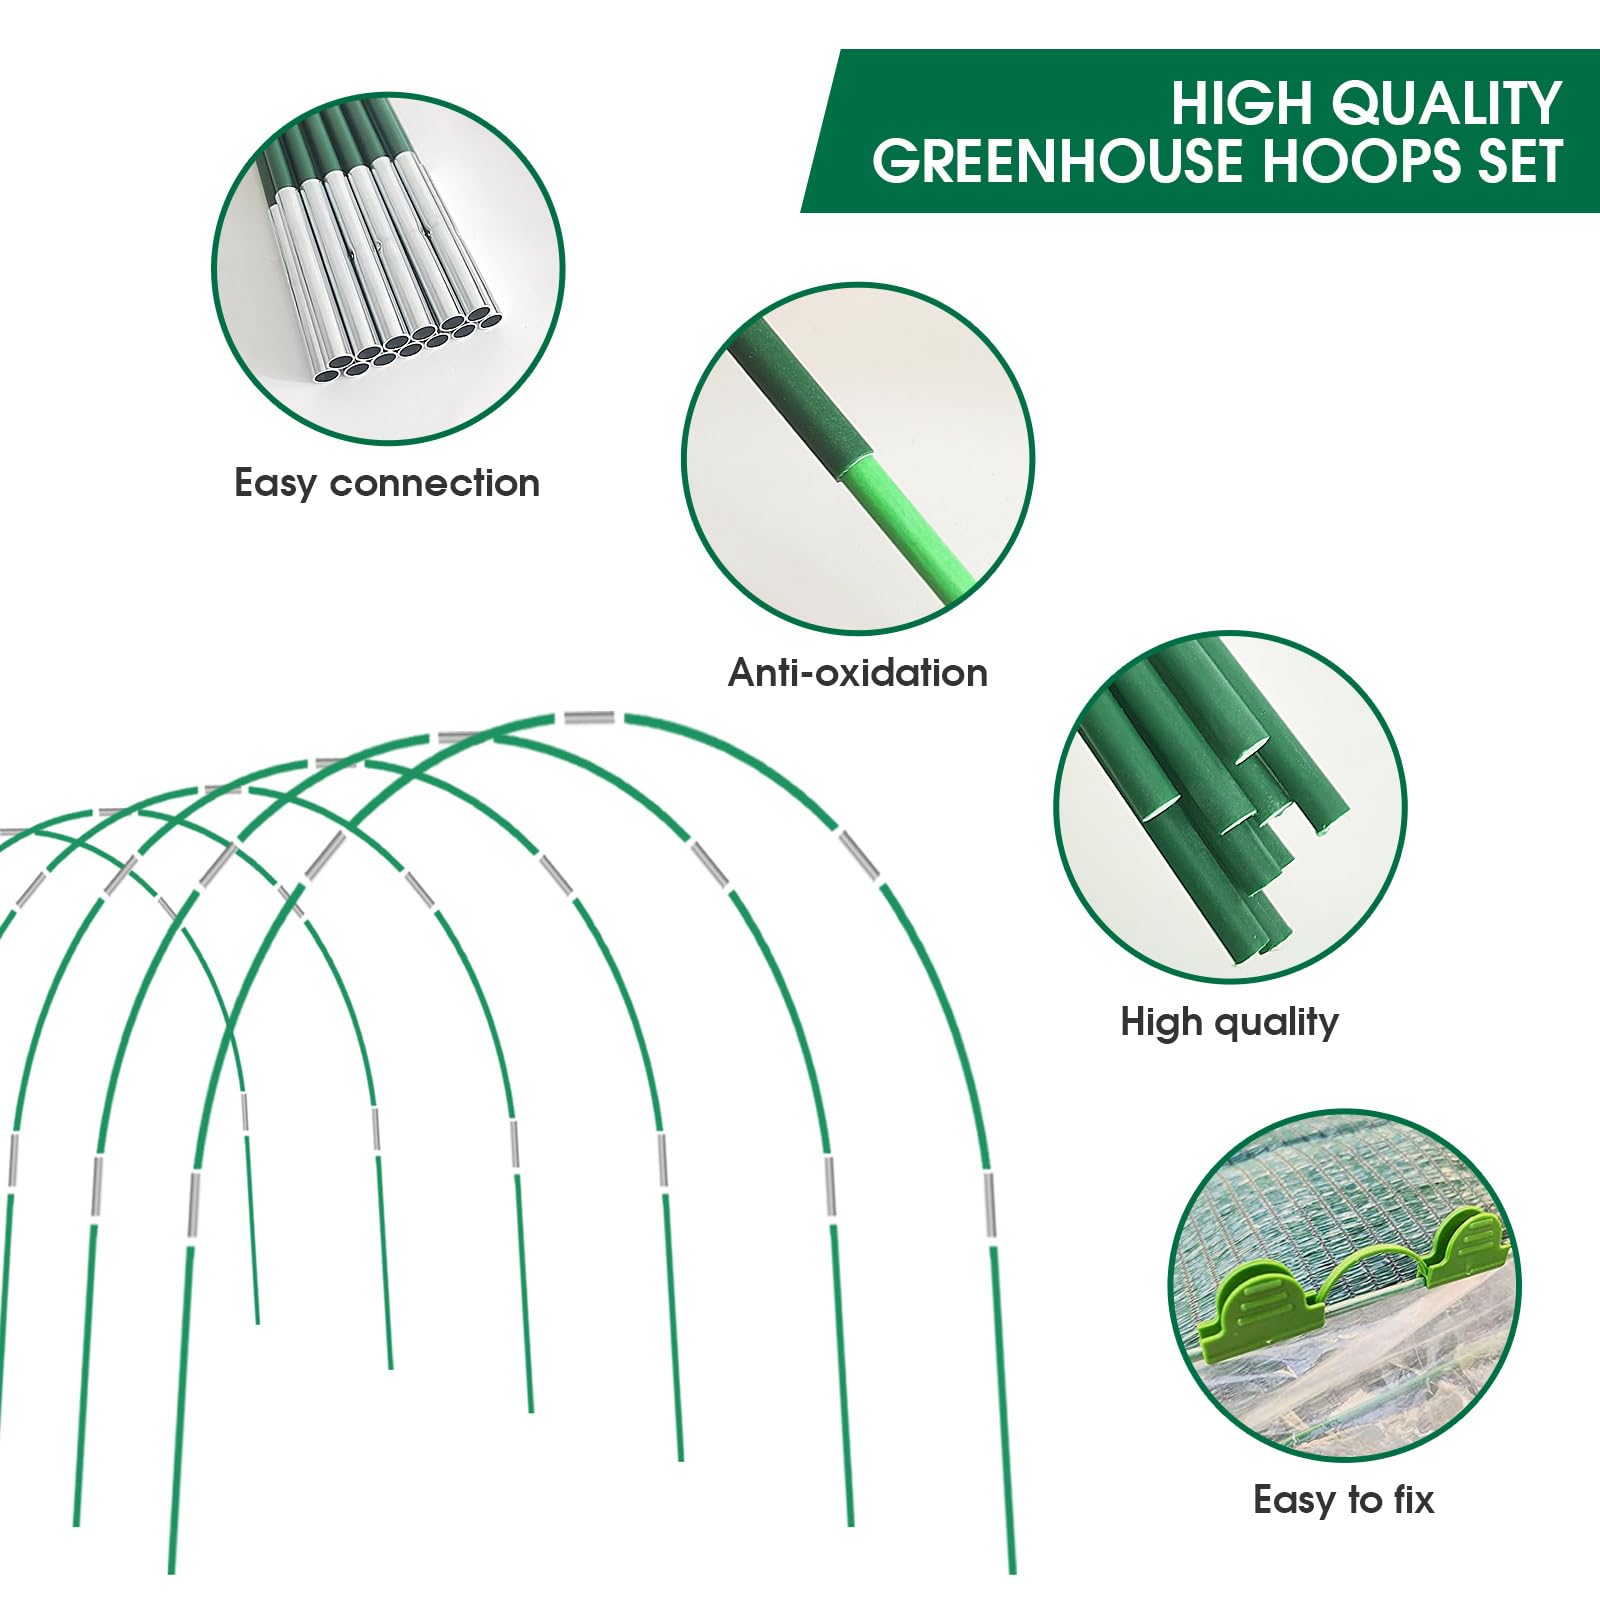 JCKHXG Garden Hoops for Raised Bed, 6 Sets of 8FT Long Greenhouse Hoops Grow Tunnel, Rust-Free Fiberglass Support Hoops Frame for Netting, DIY Plant Support Garden Stakes for Row Cover, 36pcs